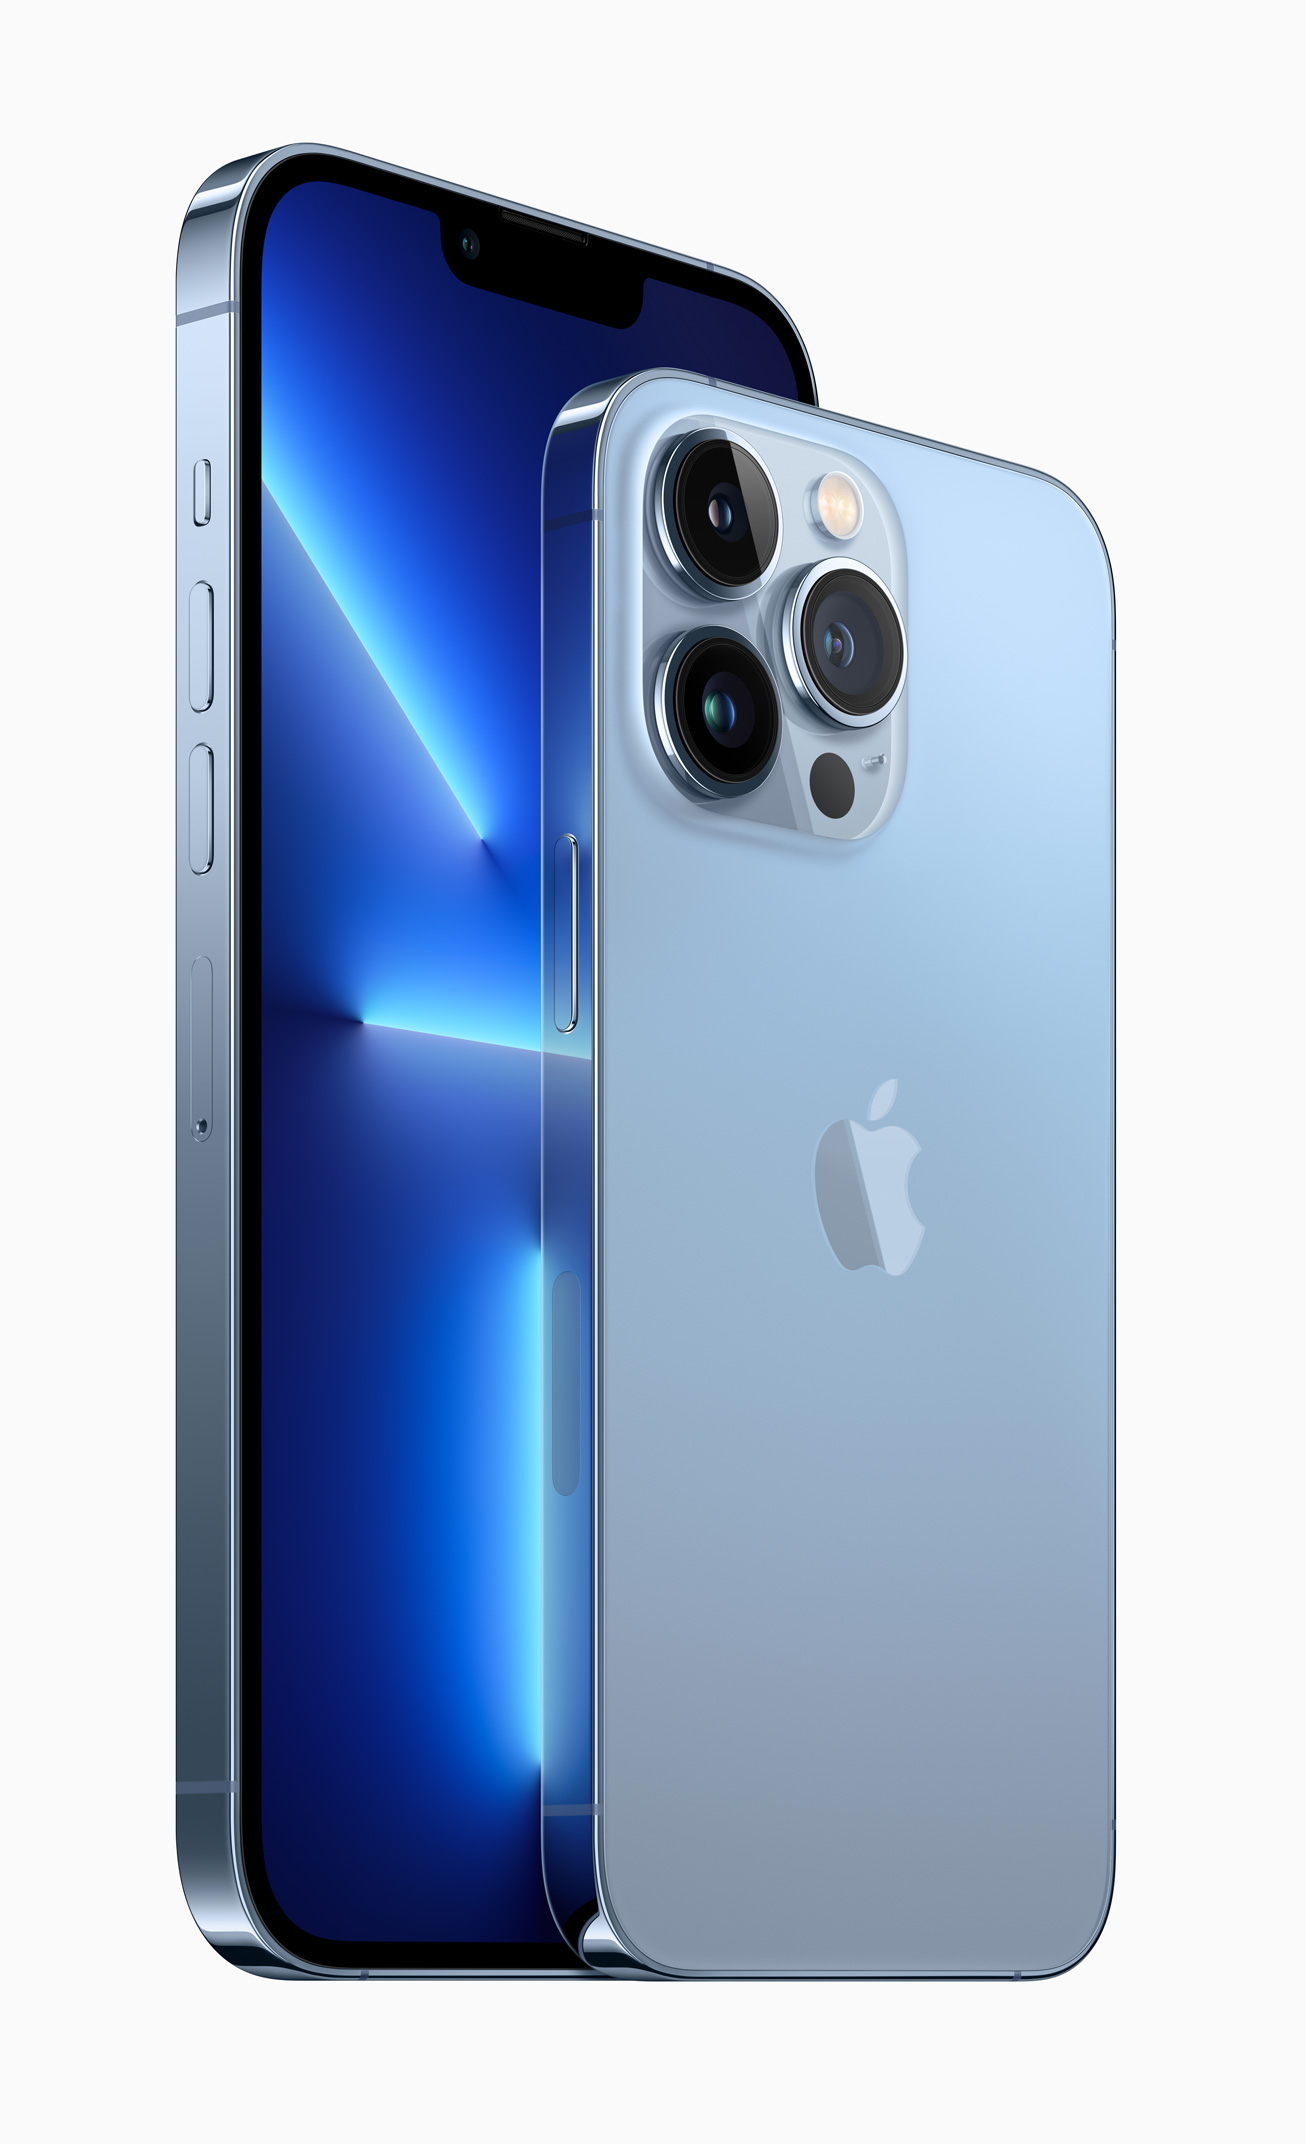 Apple iPhone 13 Pro and iPhone 13 Pro Max announced with 5-core GPU A15  Bionic, ProRes video capture, 120 Hz ProMotion display, and dual eSIM  support - NotebookCheck.net News